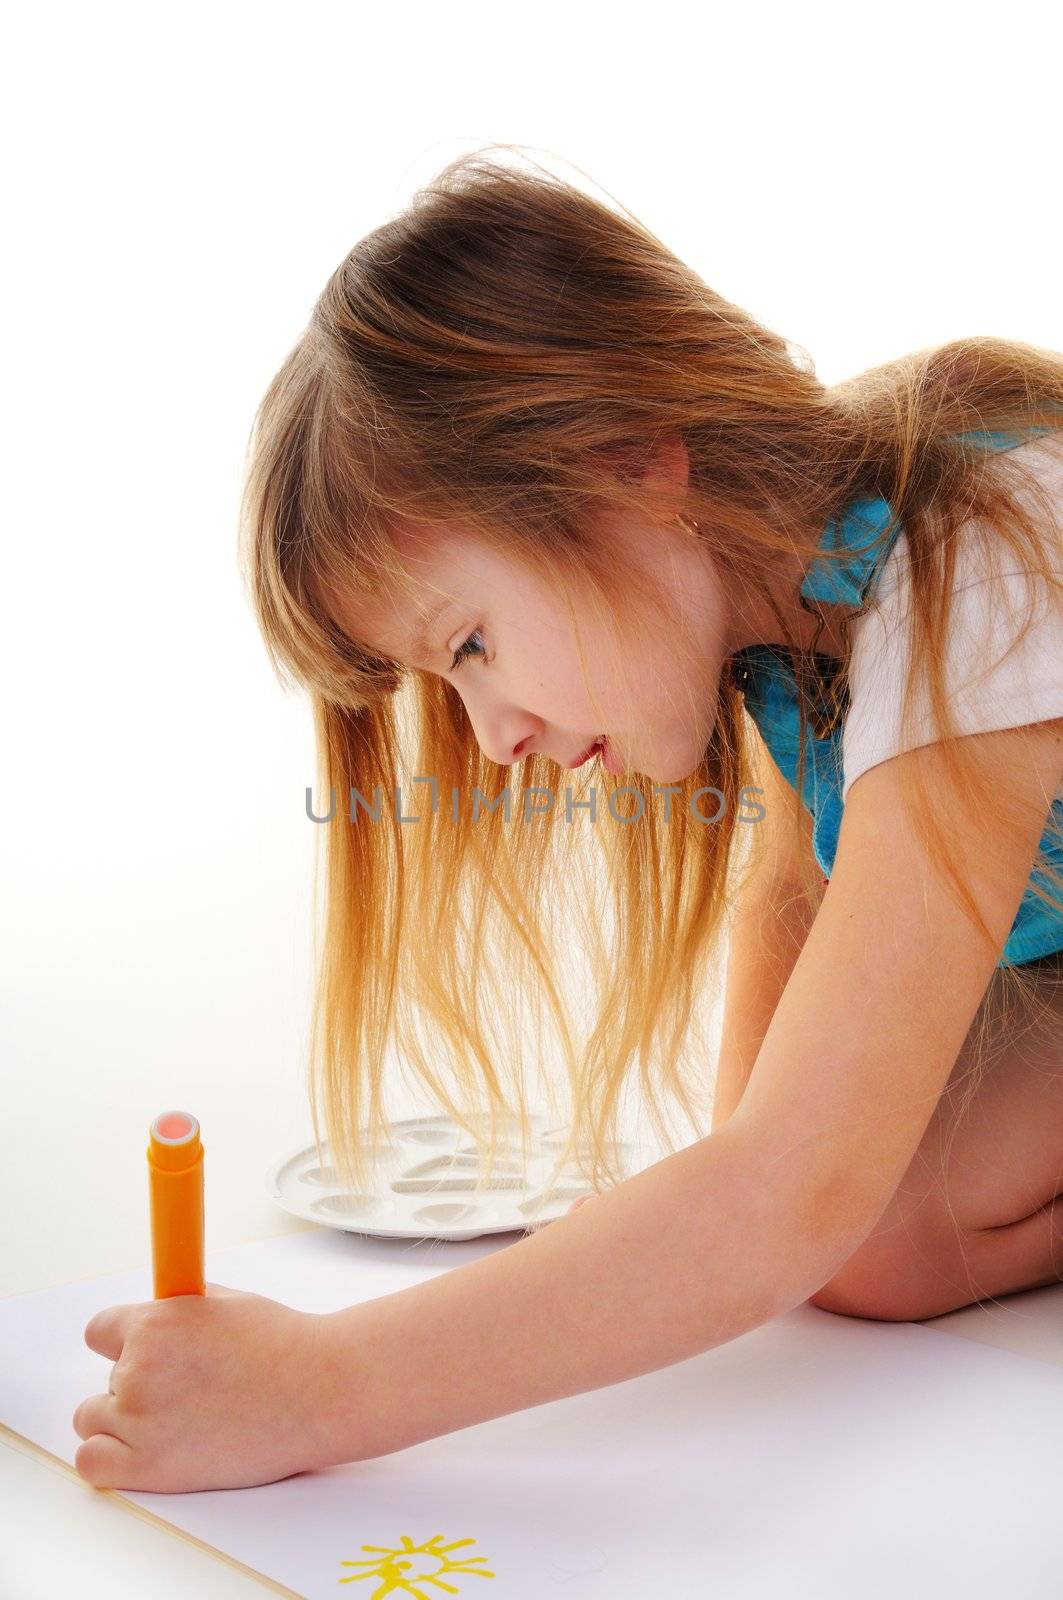 Nice girl with blonde long hair is painting on white background